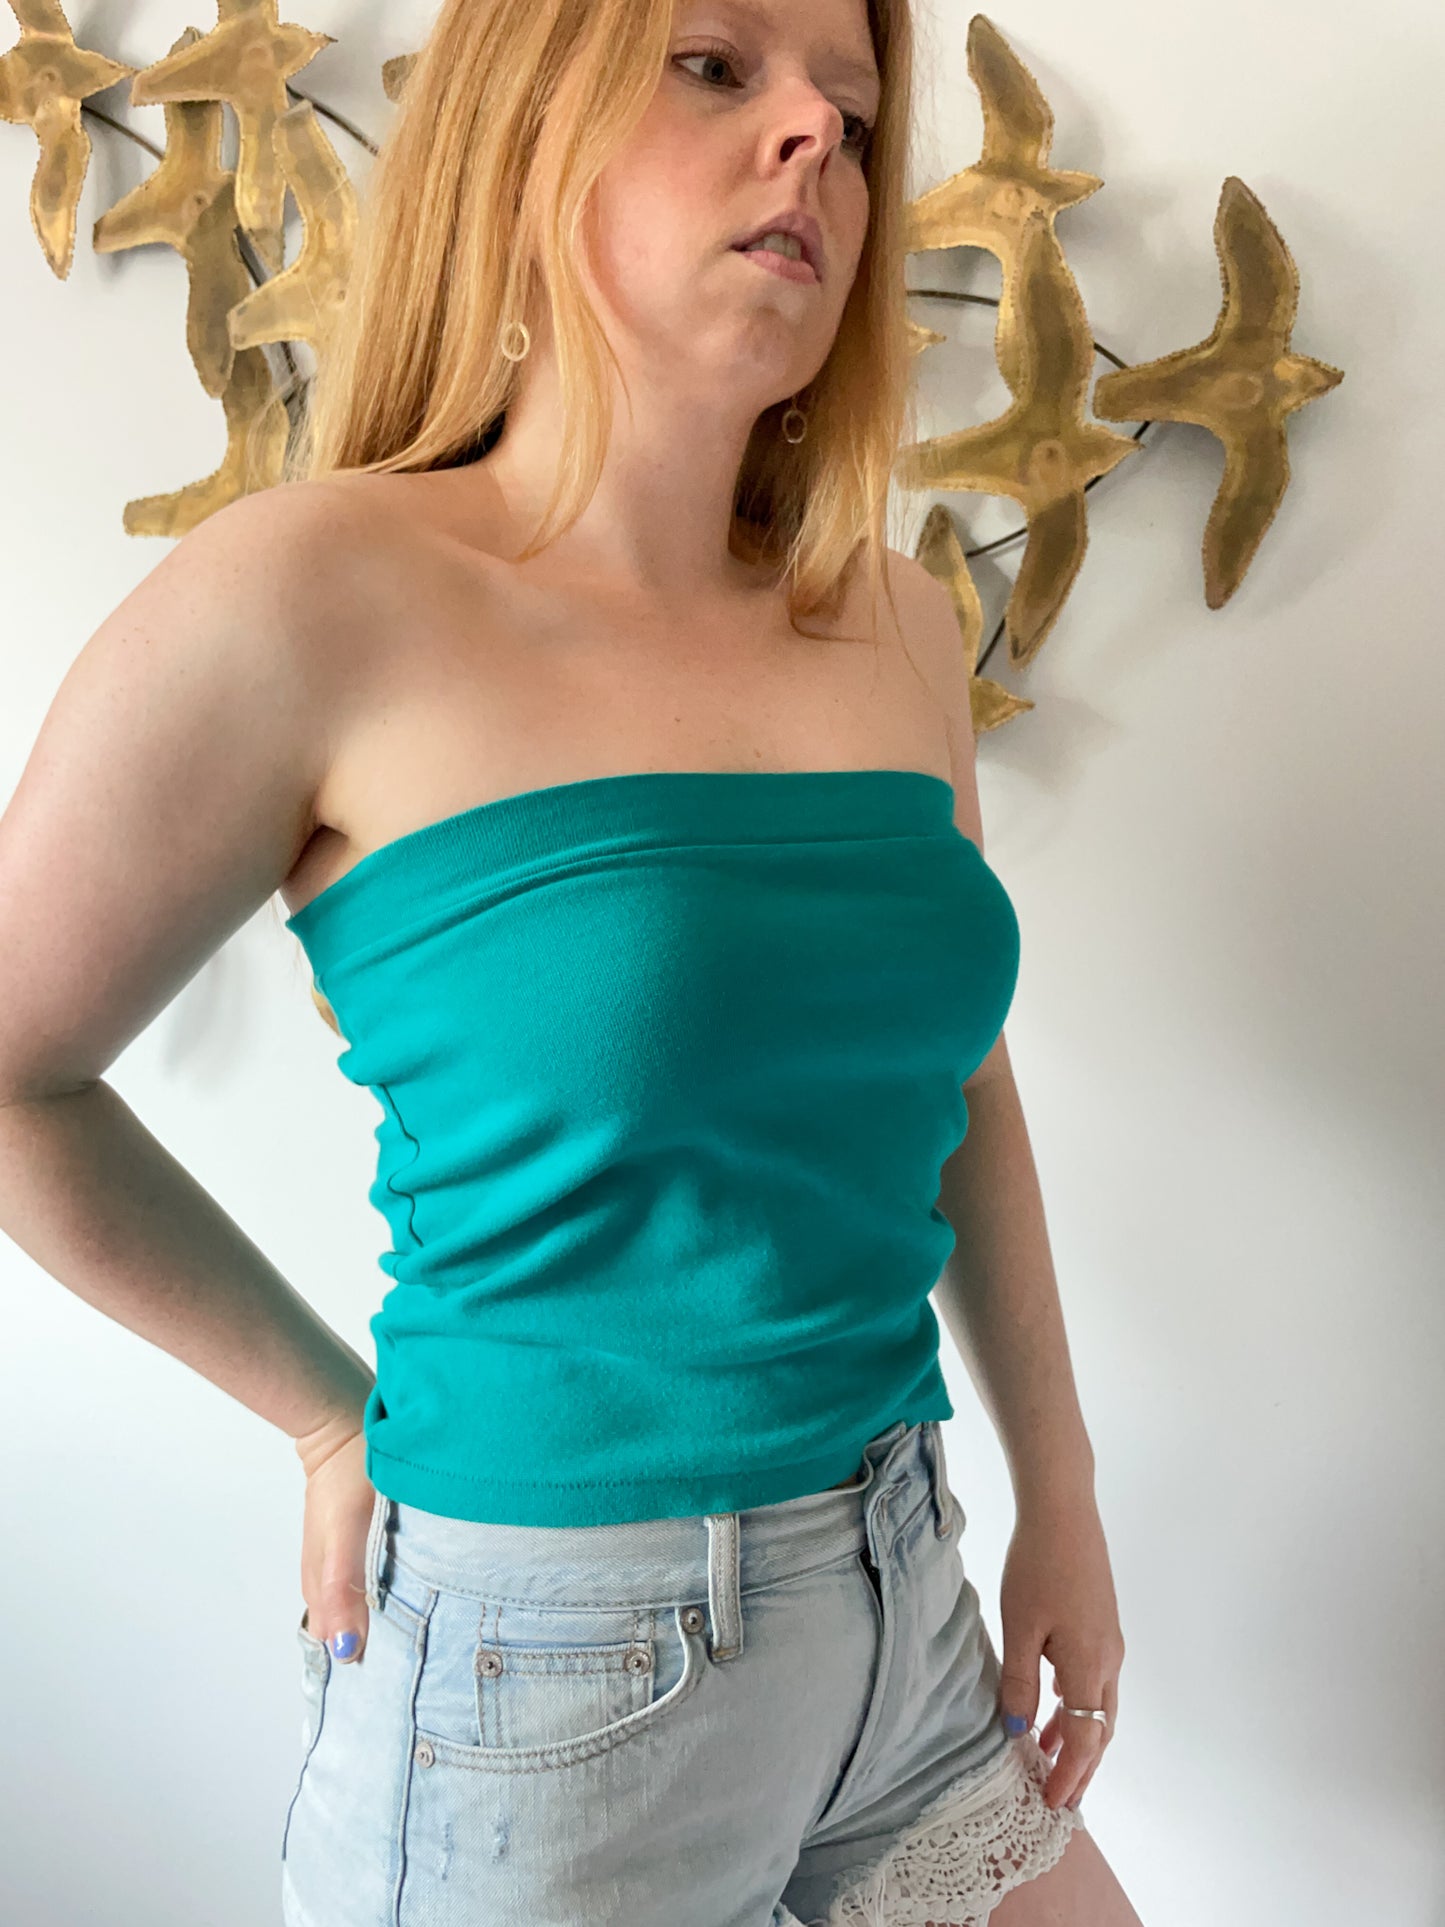 Teal Cotton 2-in-1 Tube Top Skirt - S/M